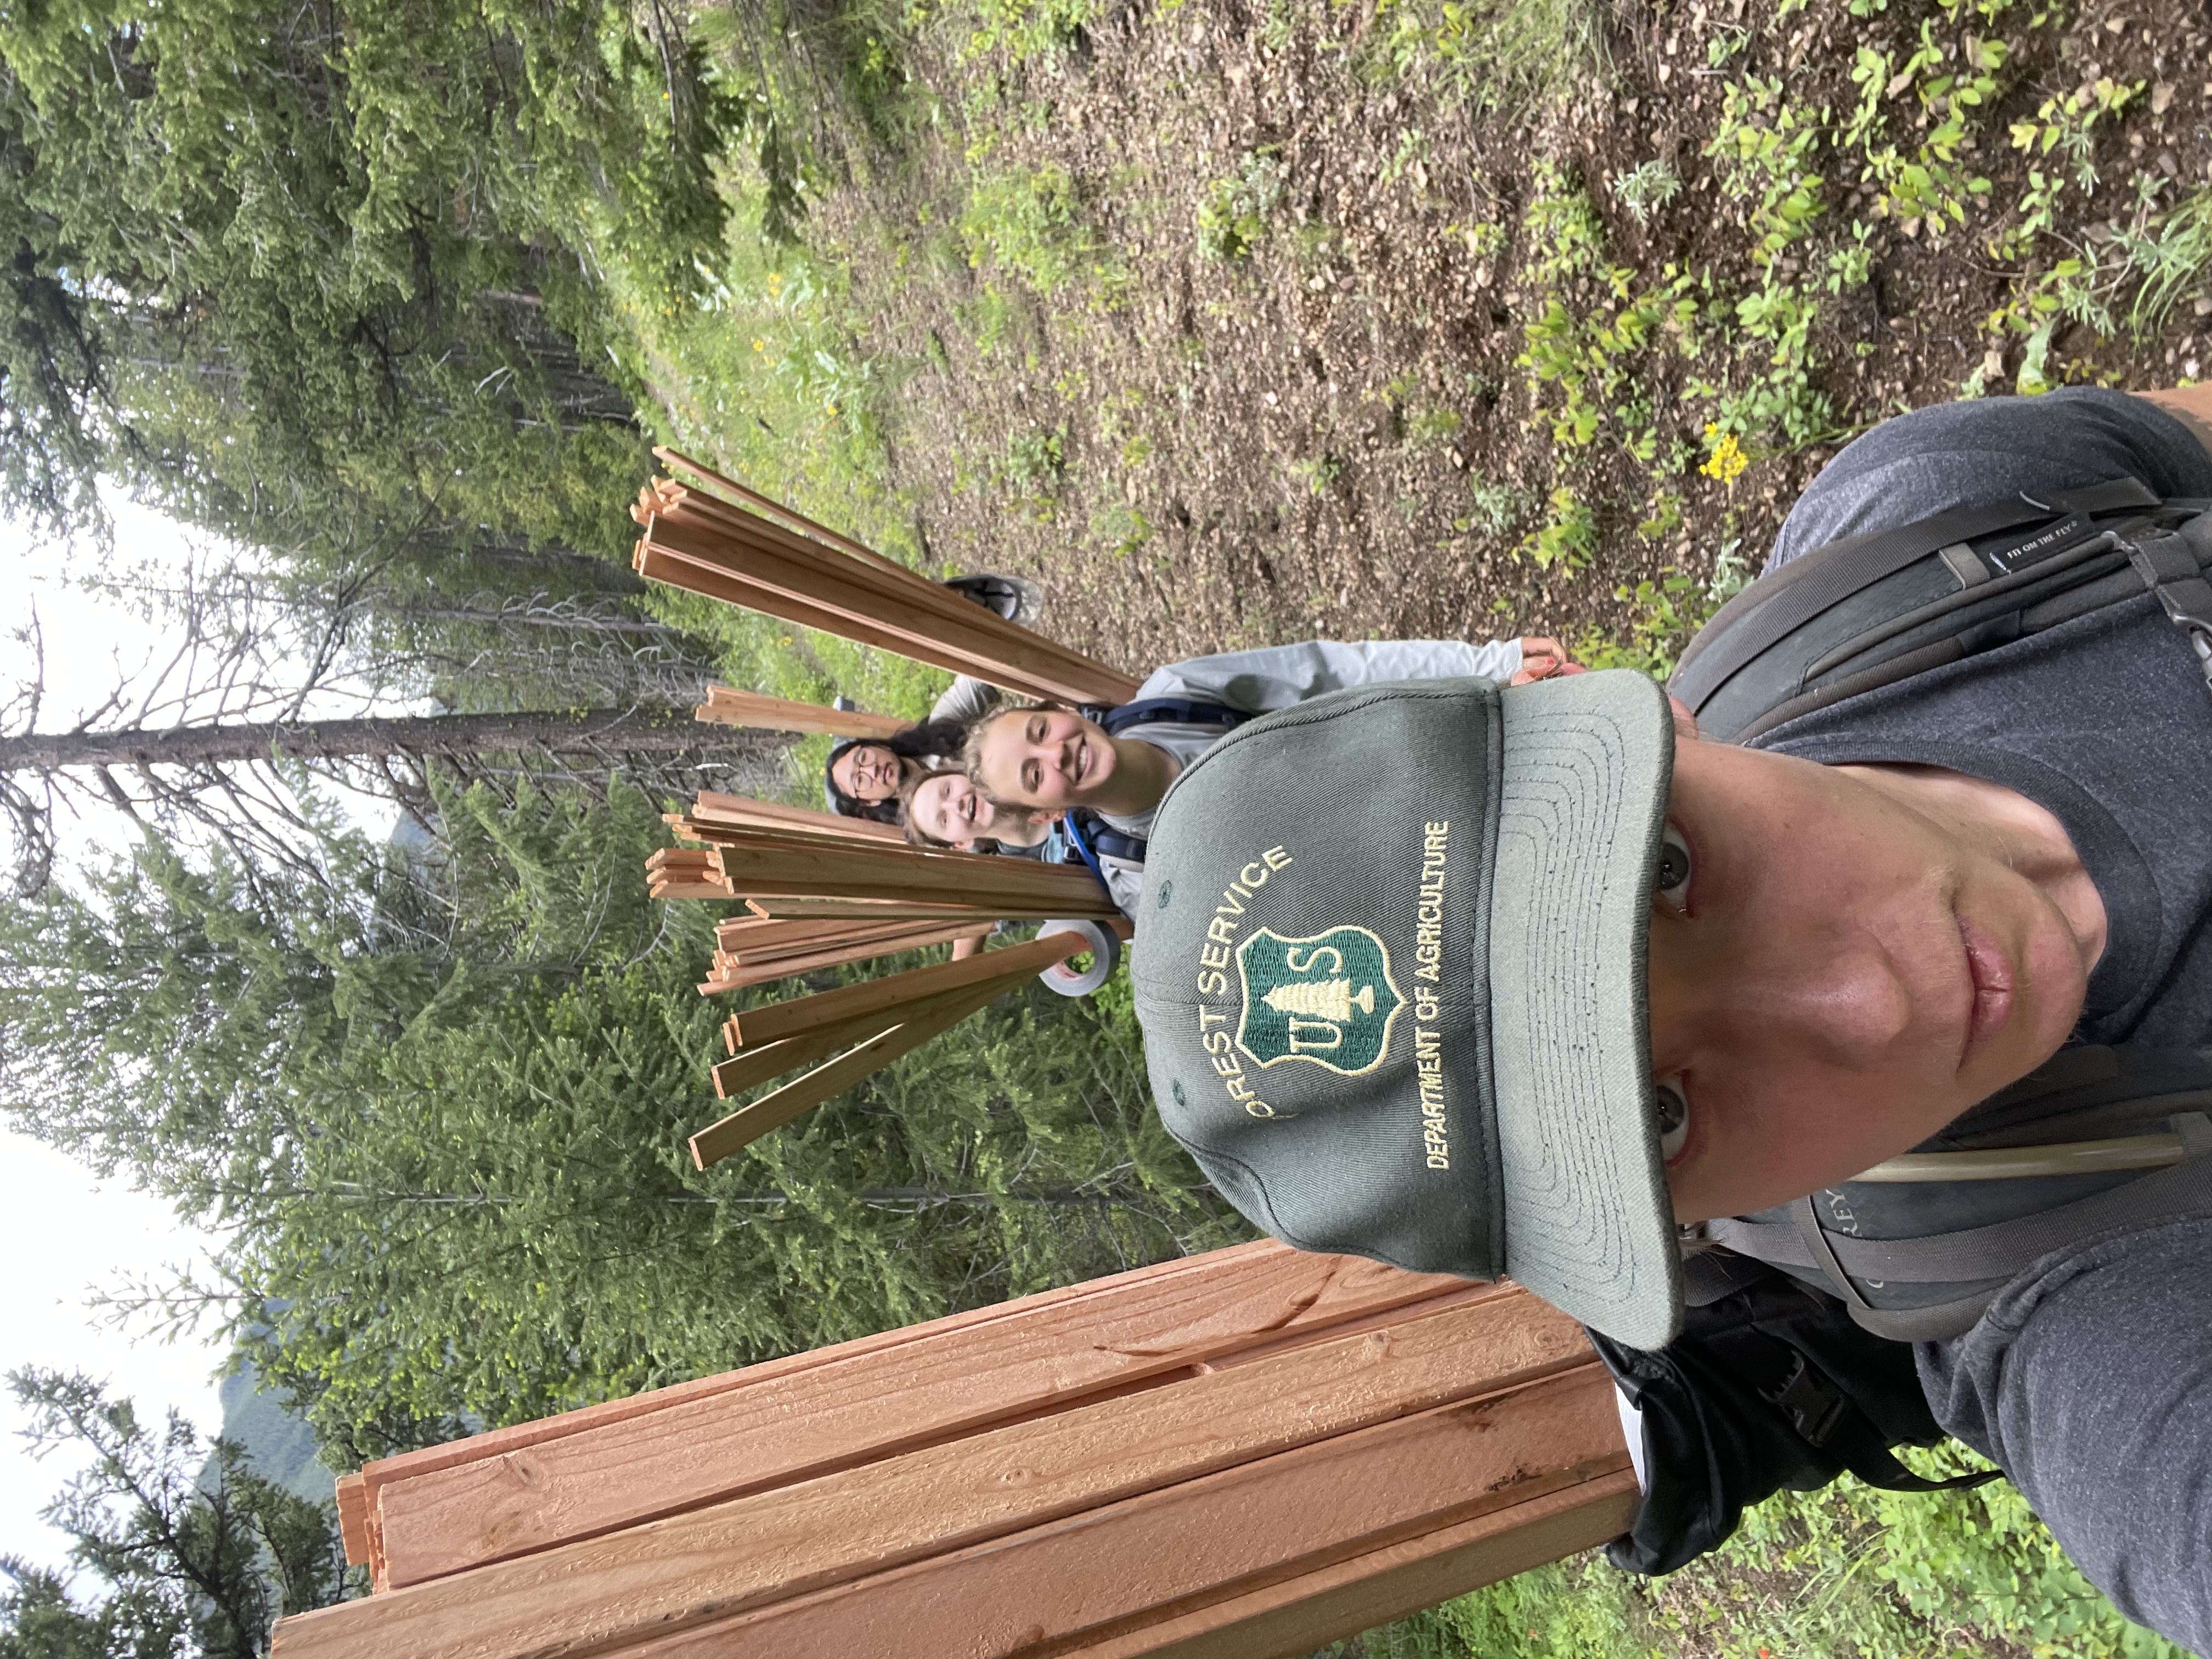 Grant with service crew members in the woods.